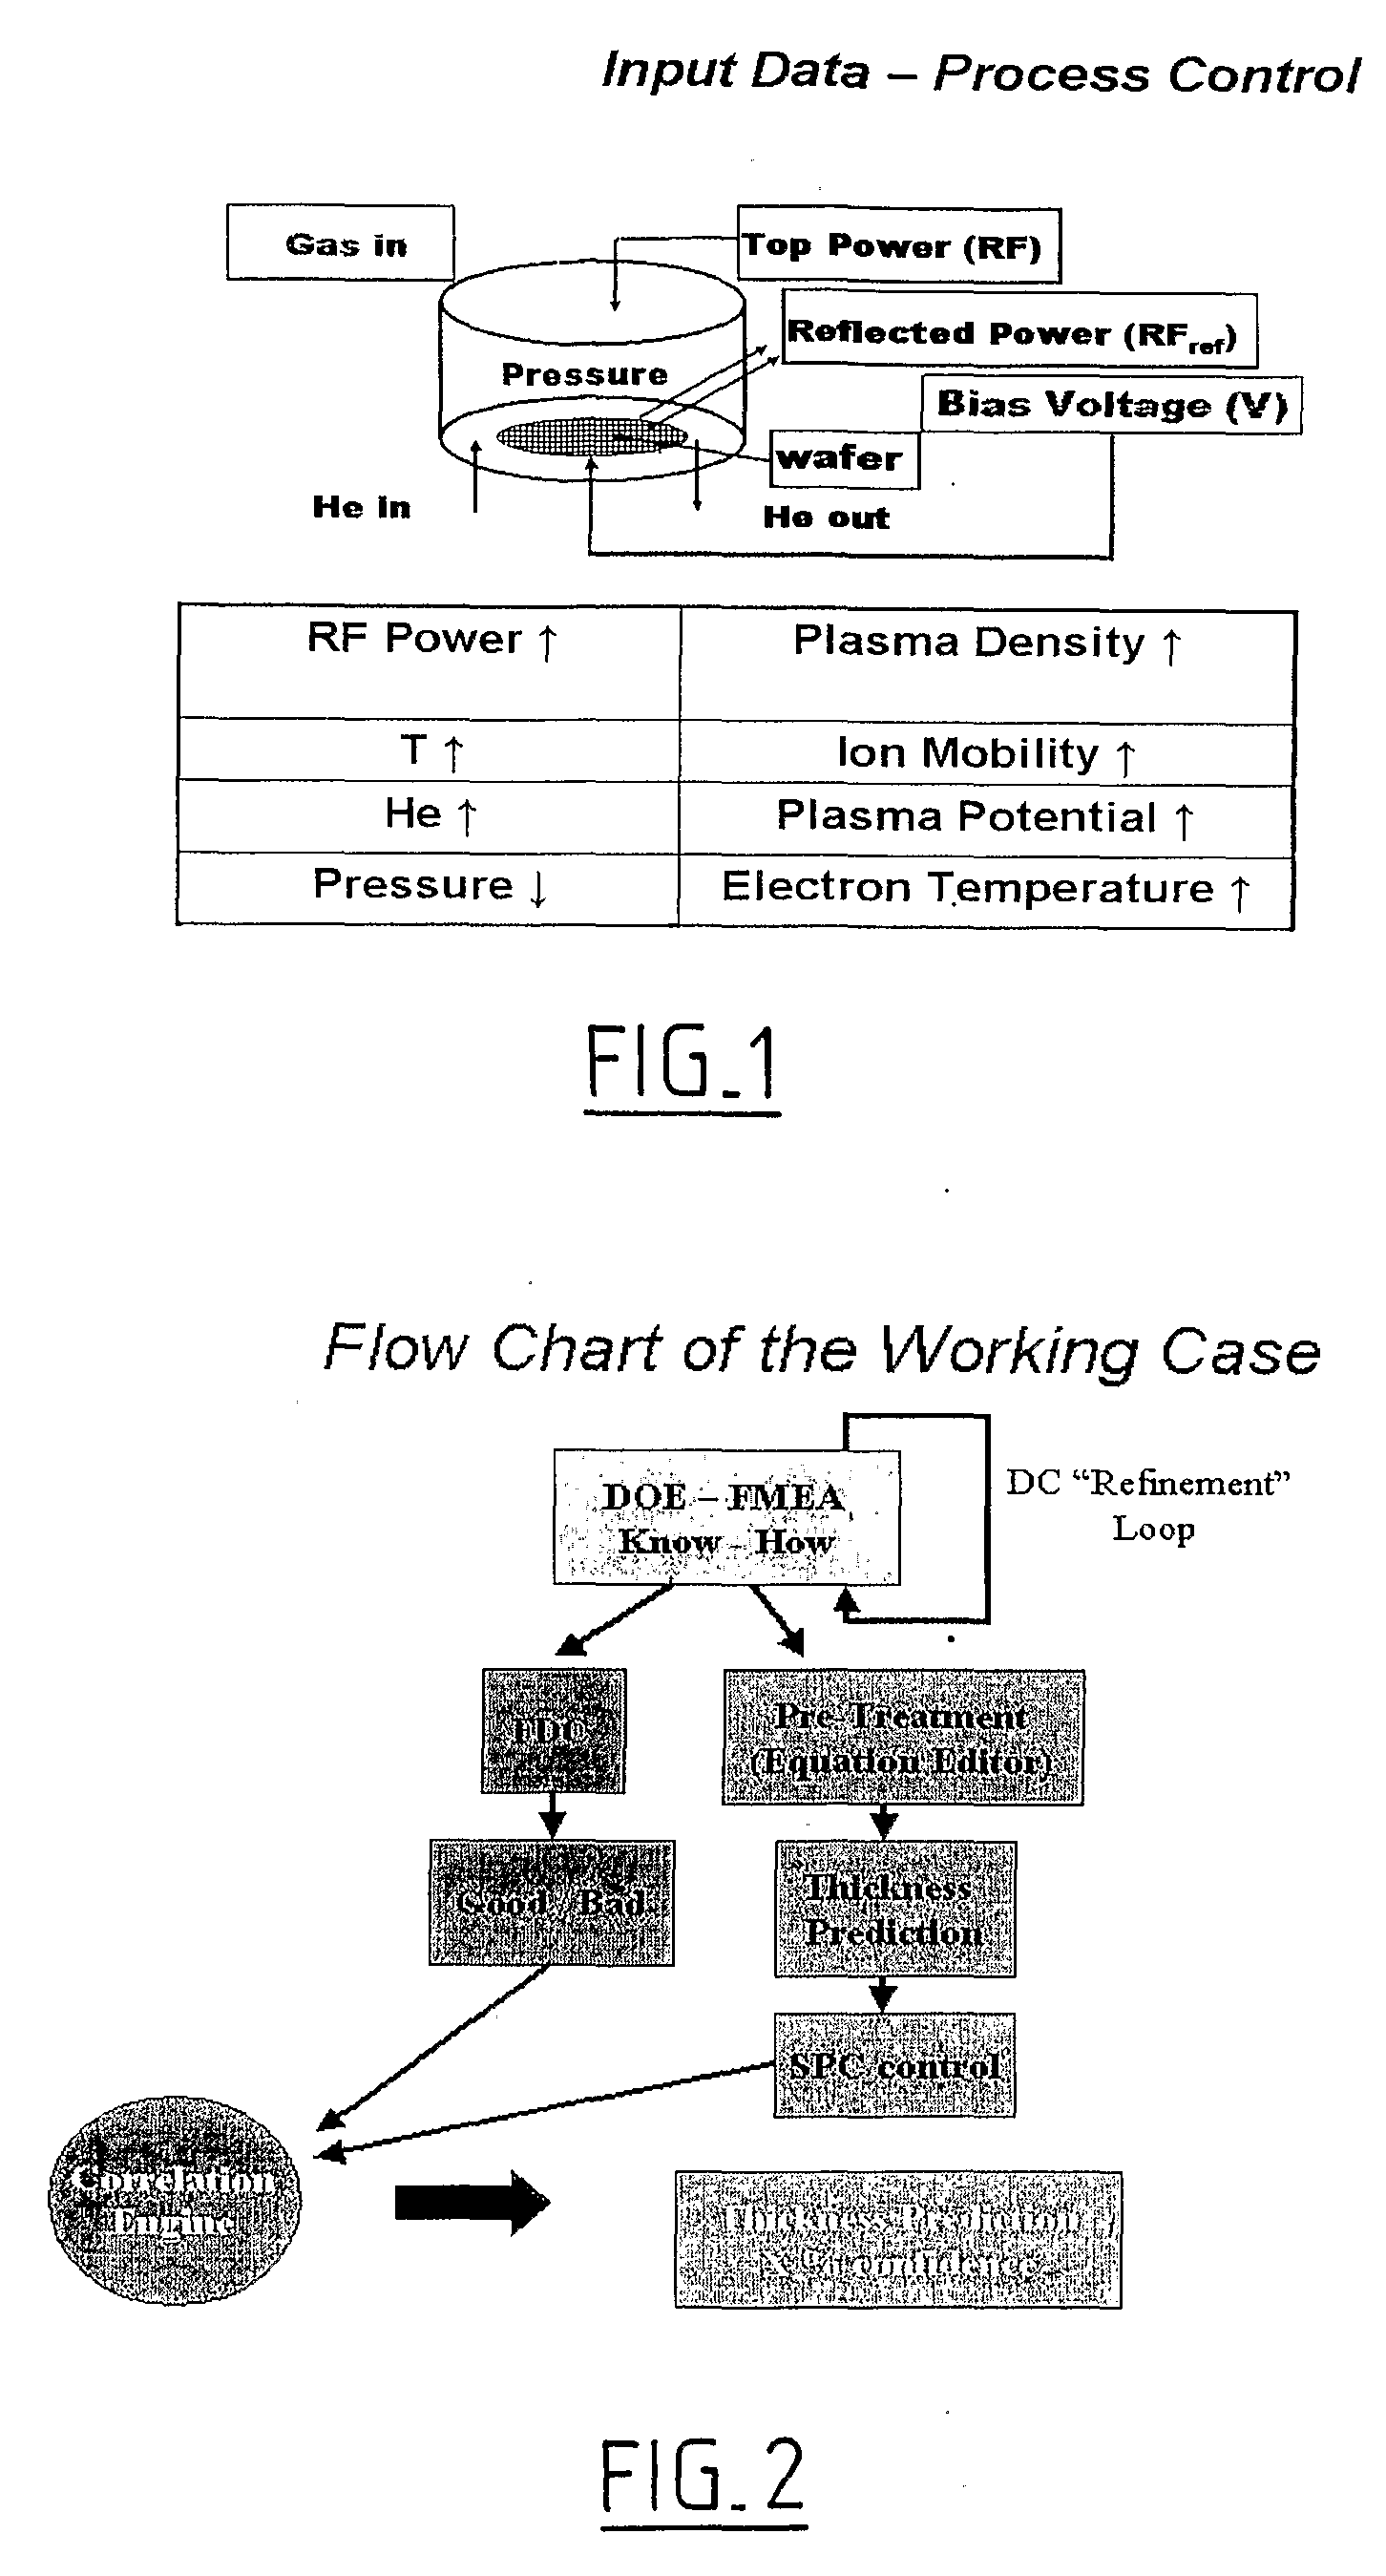 Method for Improving Efficiency of a Manufacturing Process Such as a Semiconductor Fab Process